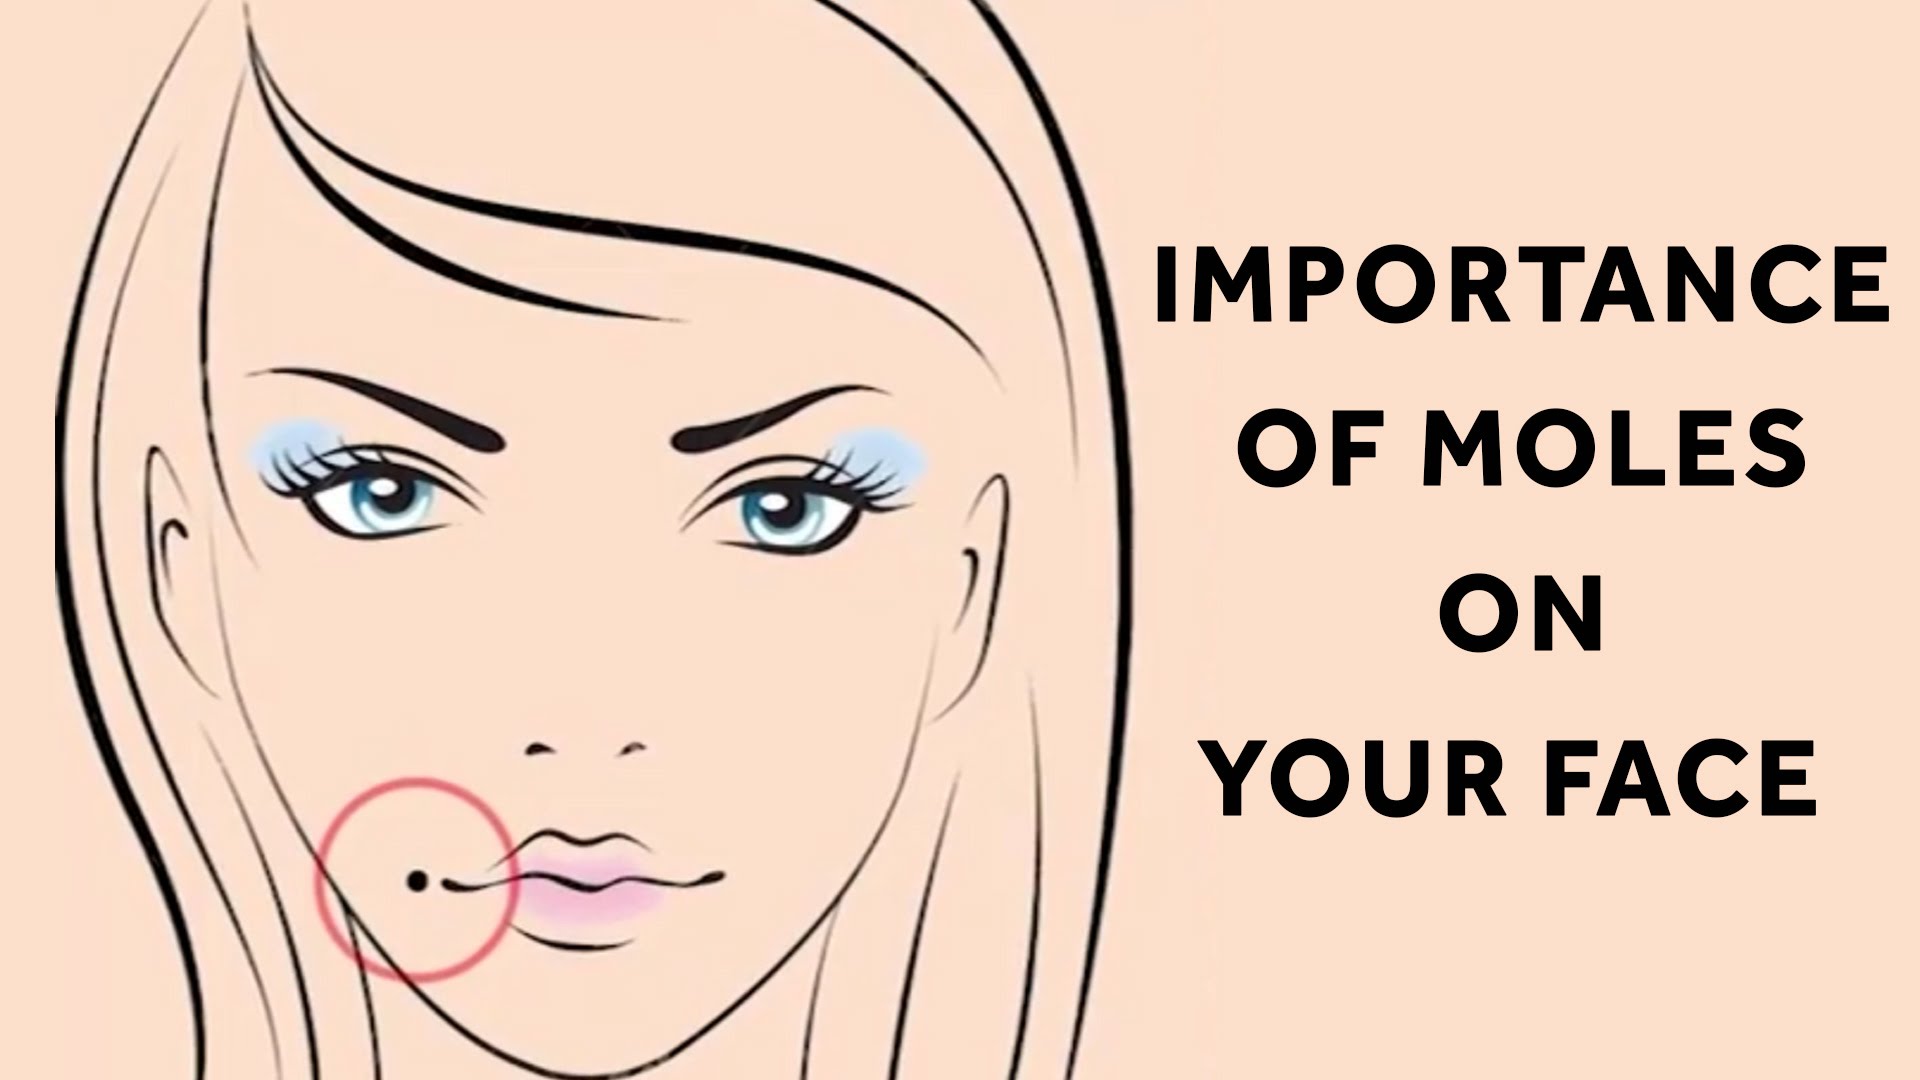 Importance of Moles on Your Face - YouTube